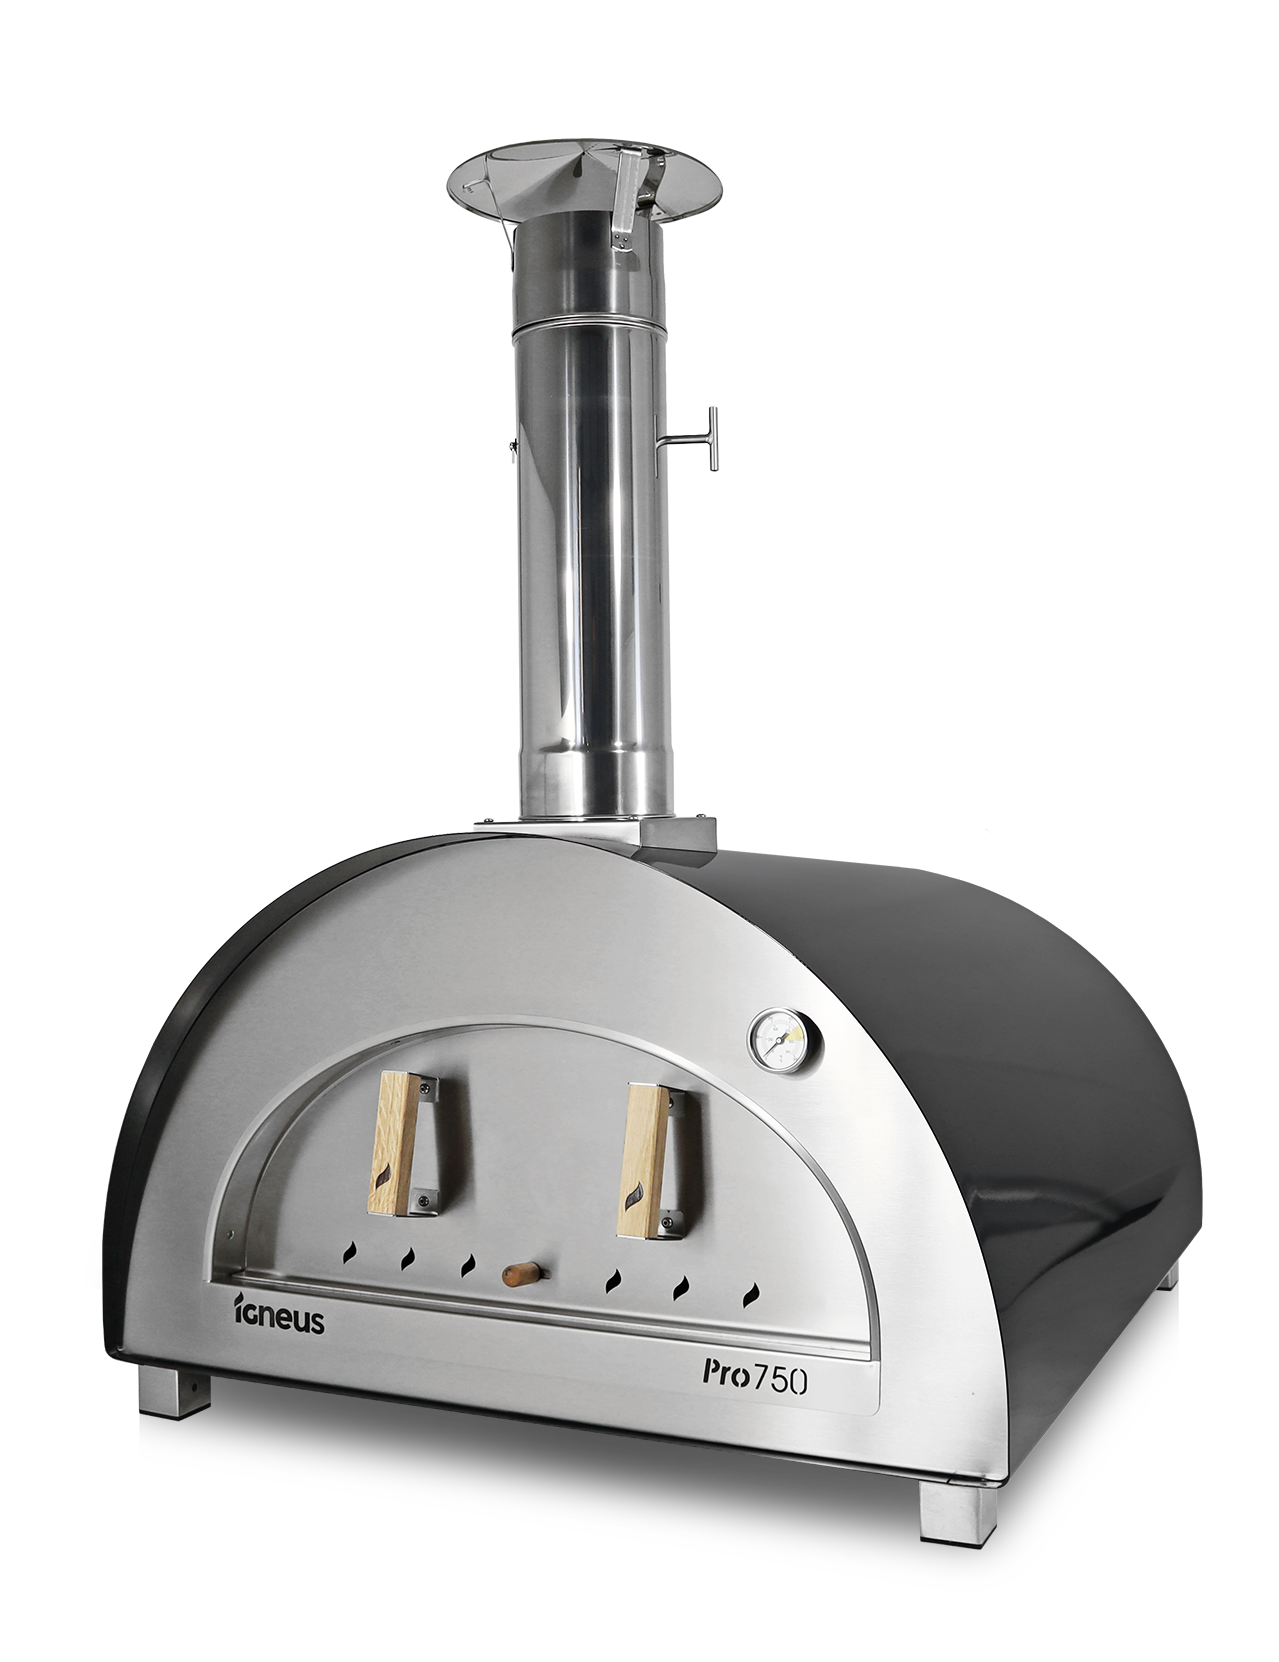 Igneus Pro 750 wood fired pizza oven